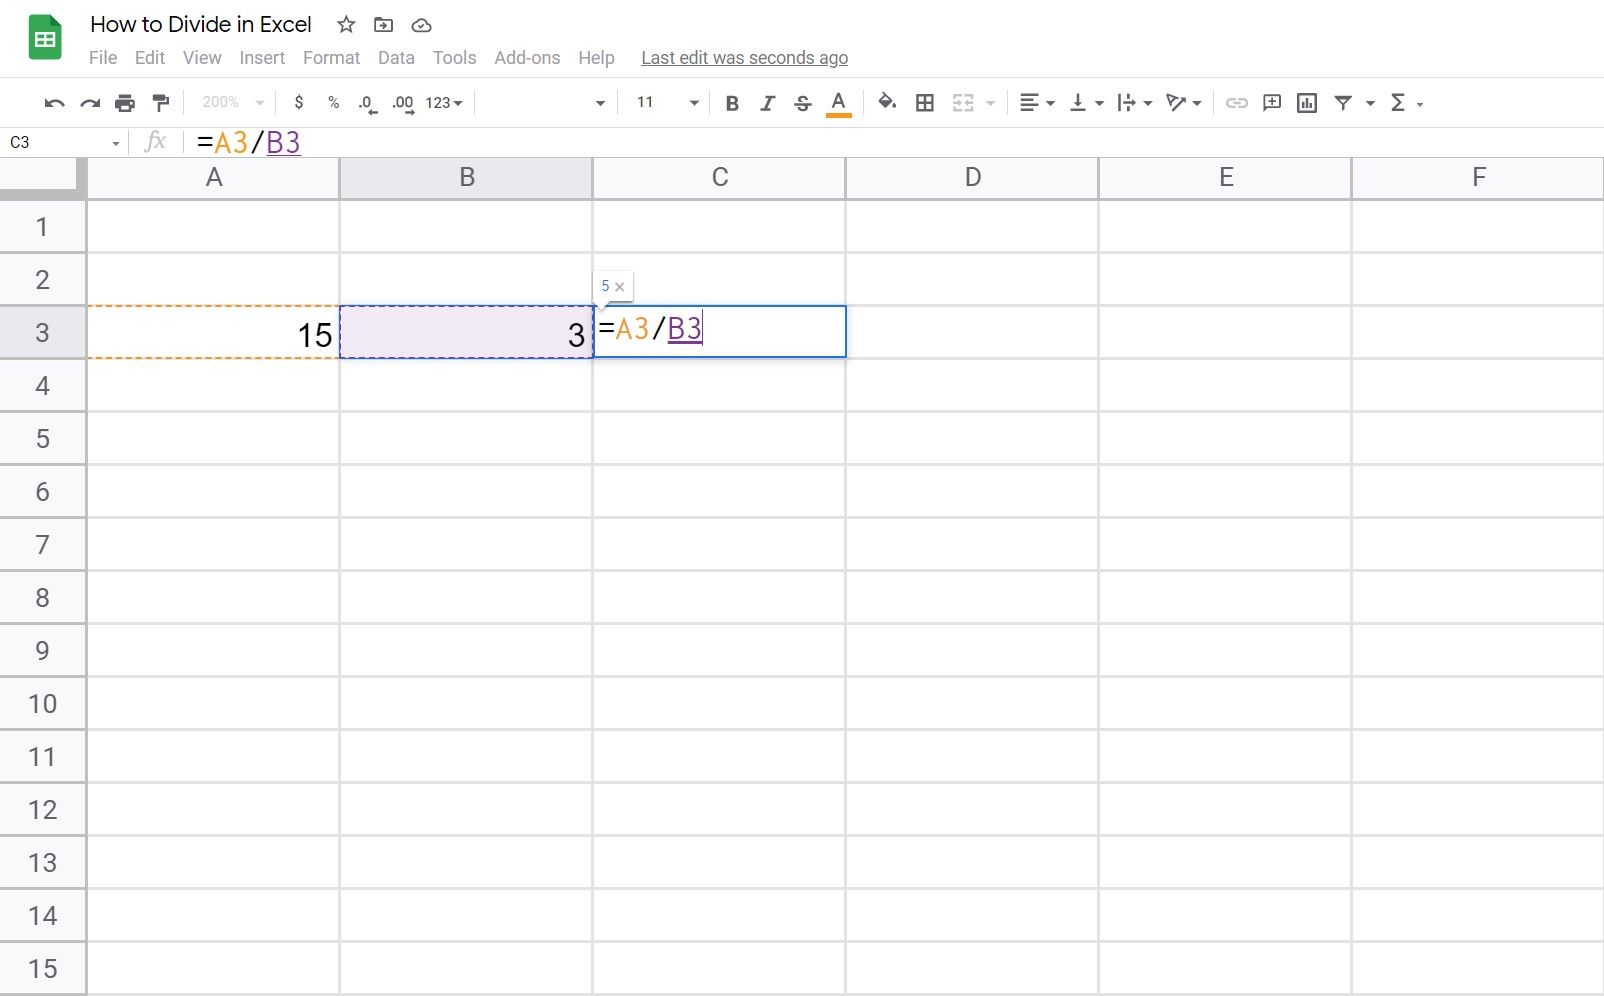 - Come dividere in Excel